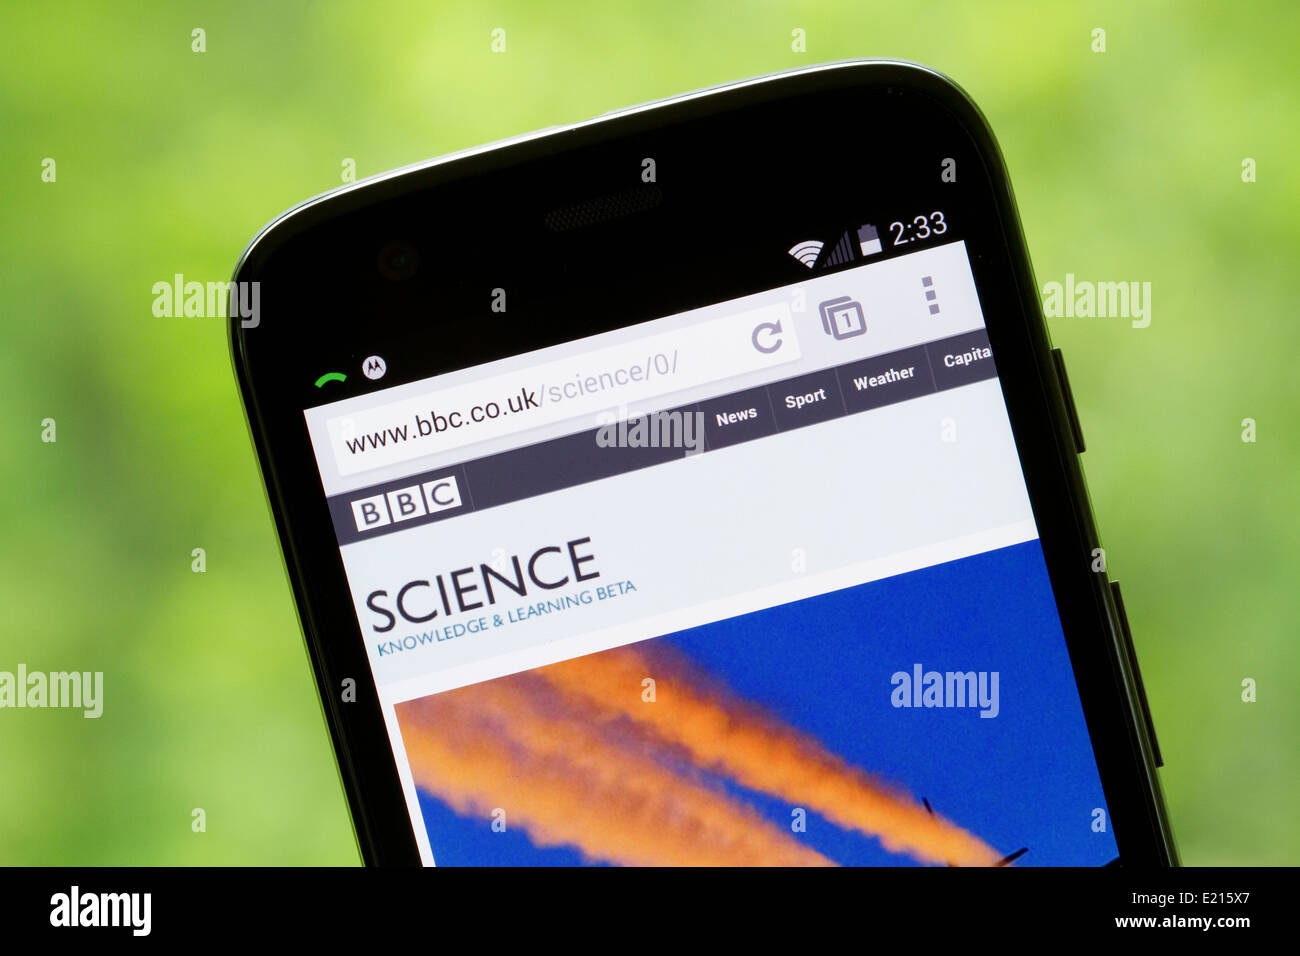 BBC Science page website displayed on the screen of a Motorola, Moto G cellphone, mobile phone. Stock Photo